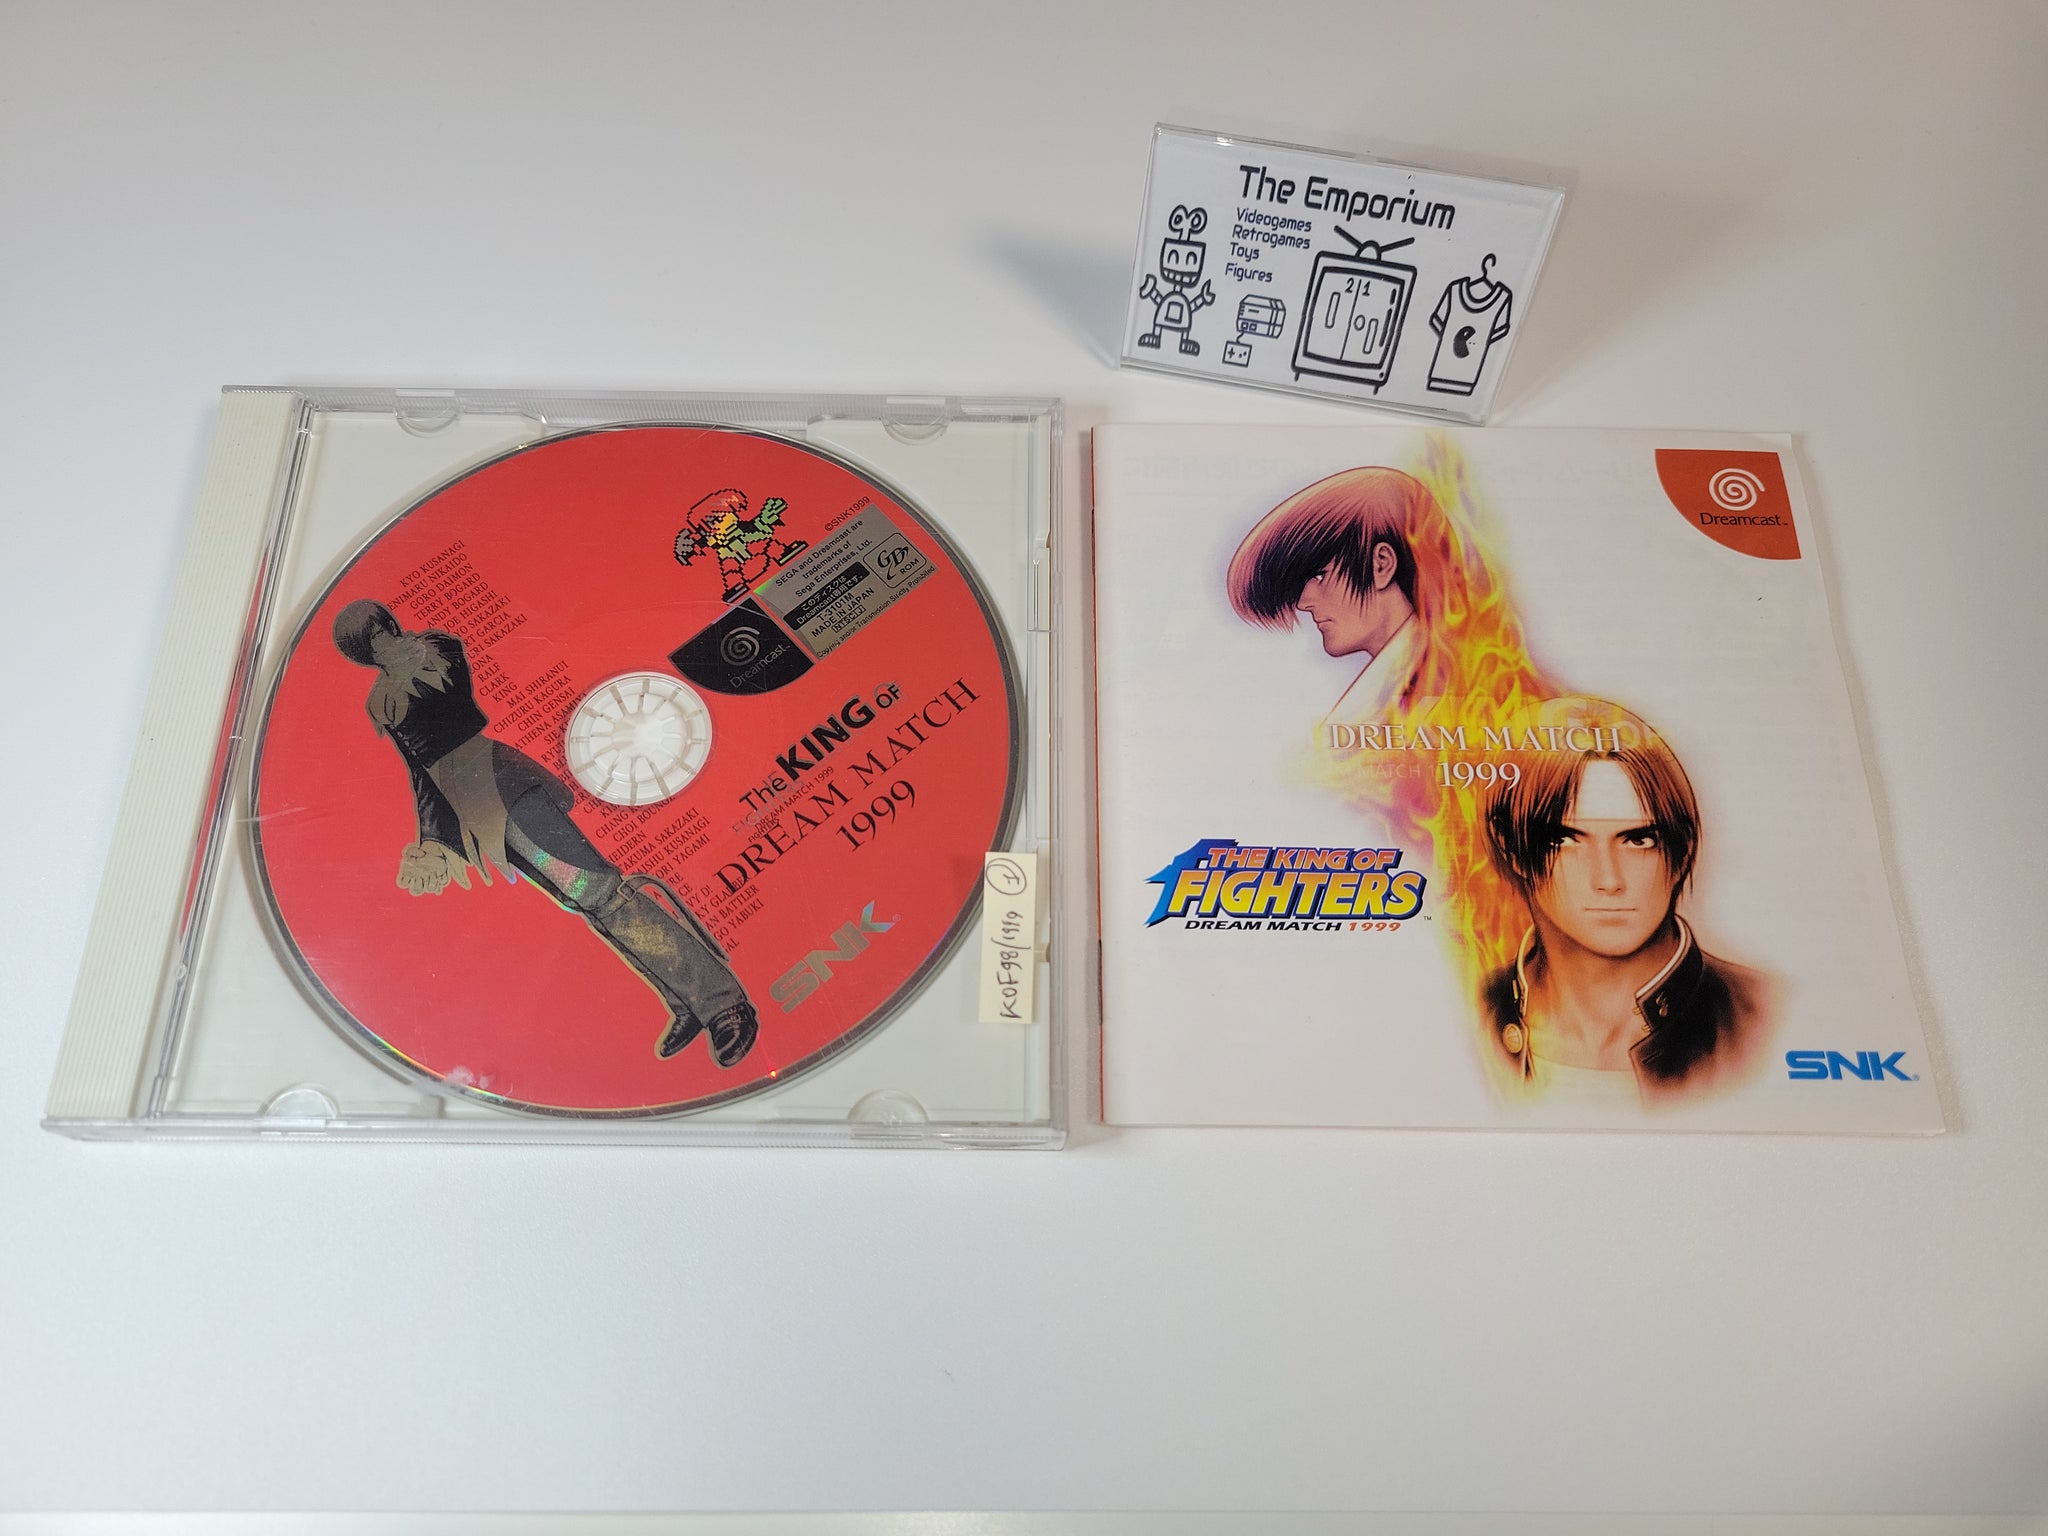 The king of fighters 98 Dream Match 1999 - Sega dc Dreamcast